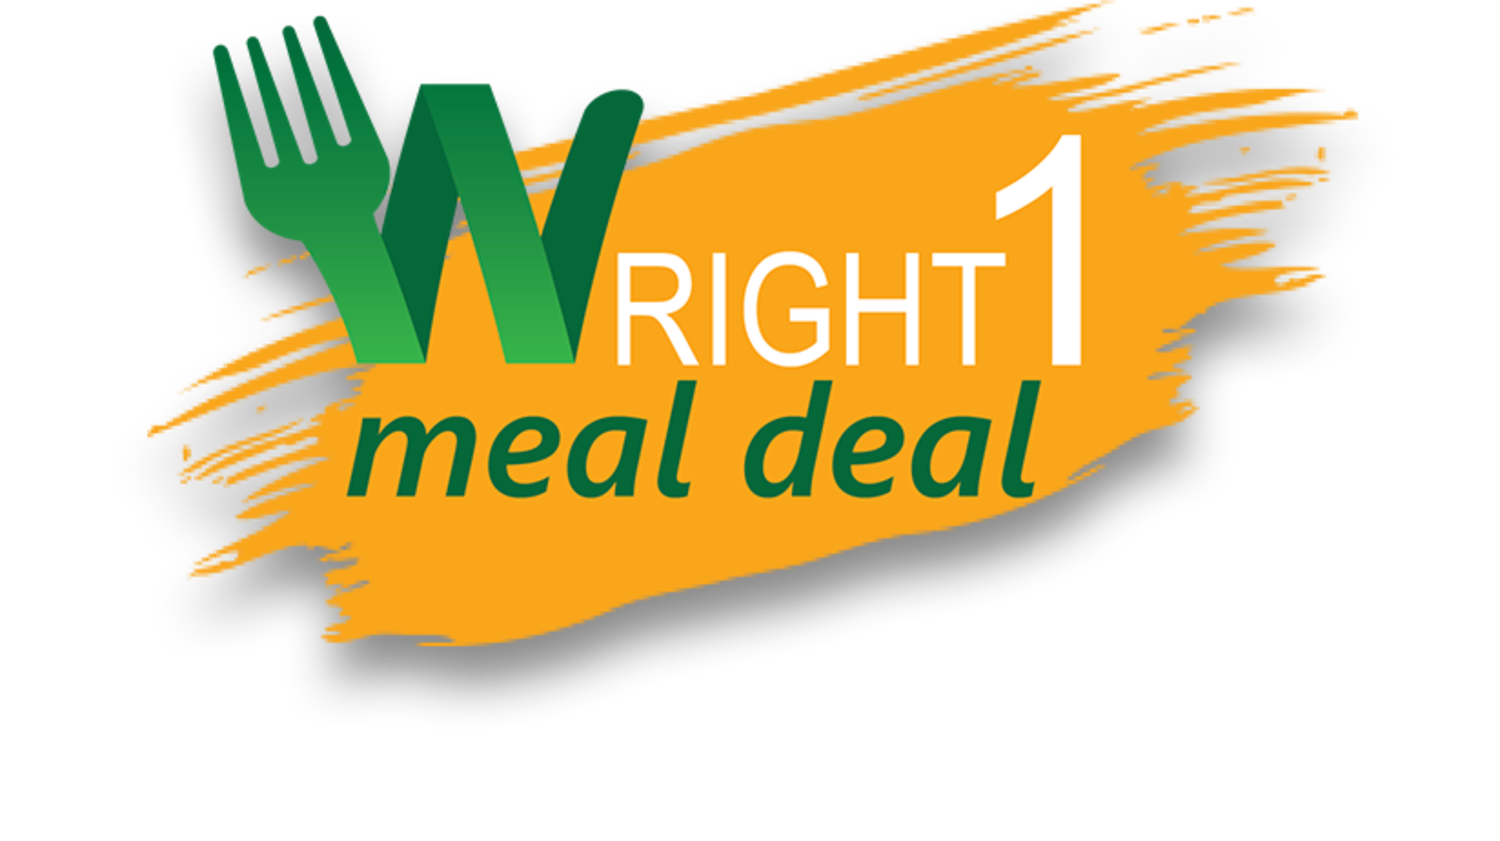 Meal Deal graphic